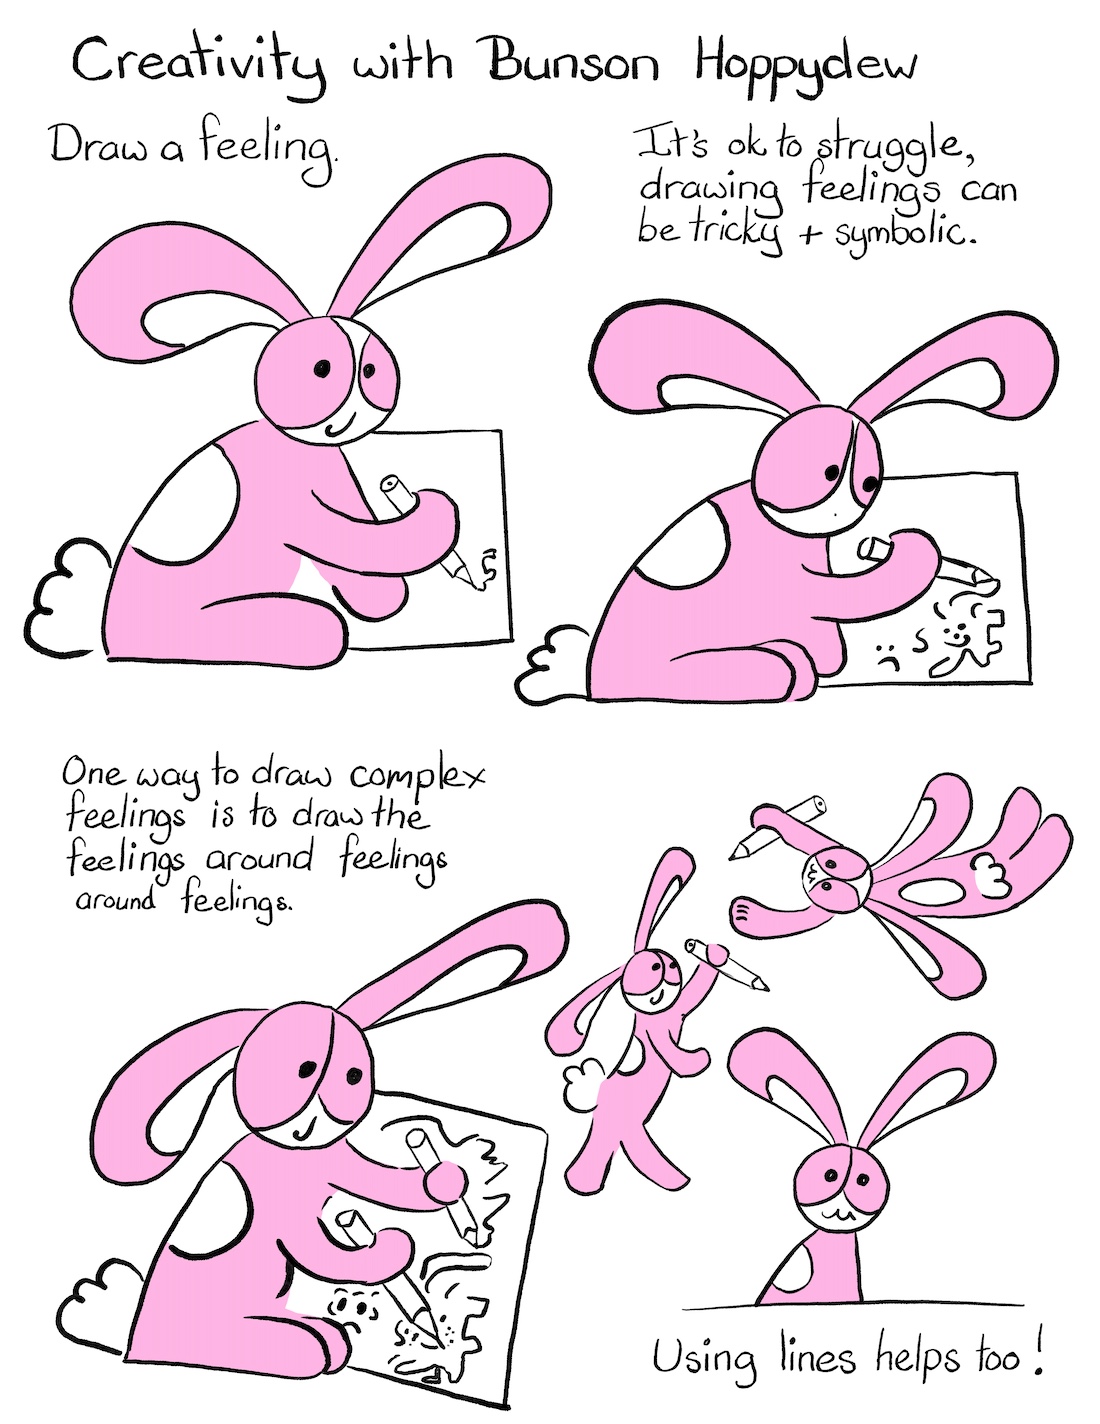 Draw a Feeling, Comic Transcript Bunson Hoppydew, a little pink bunny, he likes dancing friendship and cake, is drawing on a piece of paper and smiling at us Caption: Draw a feeling Bunson concentrates intensely as he draws further lines, bending over the page. Caption: It's ok to struggle, drawing feelings can be tricky and symbolic. Bunson is smiling and drawing on the page with both hands. Caption: One way to draw complex feelings is to draw the feelings around feelings around feelings. Bunson stands up, proudly holding one pencil in his hand (a little like a rampant lion, a little like someone holding their pencil like a spear!). Bunson zooms through the air, holding a pencil. Bunson sits down and smiles at us. Caption: Using lines helps too!